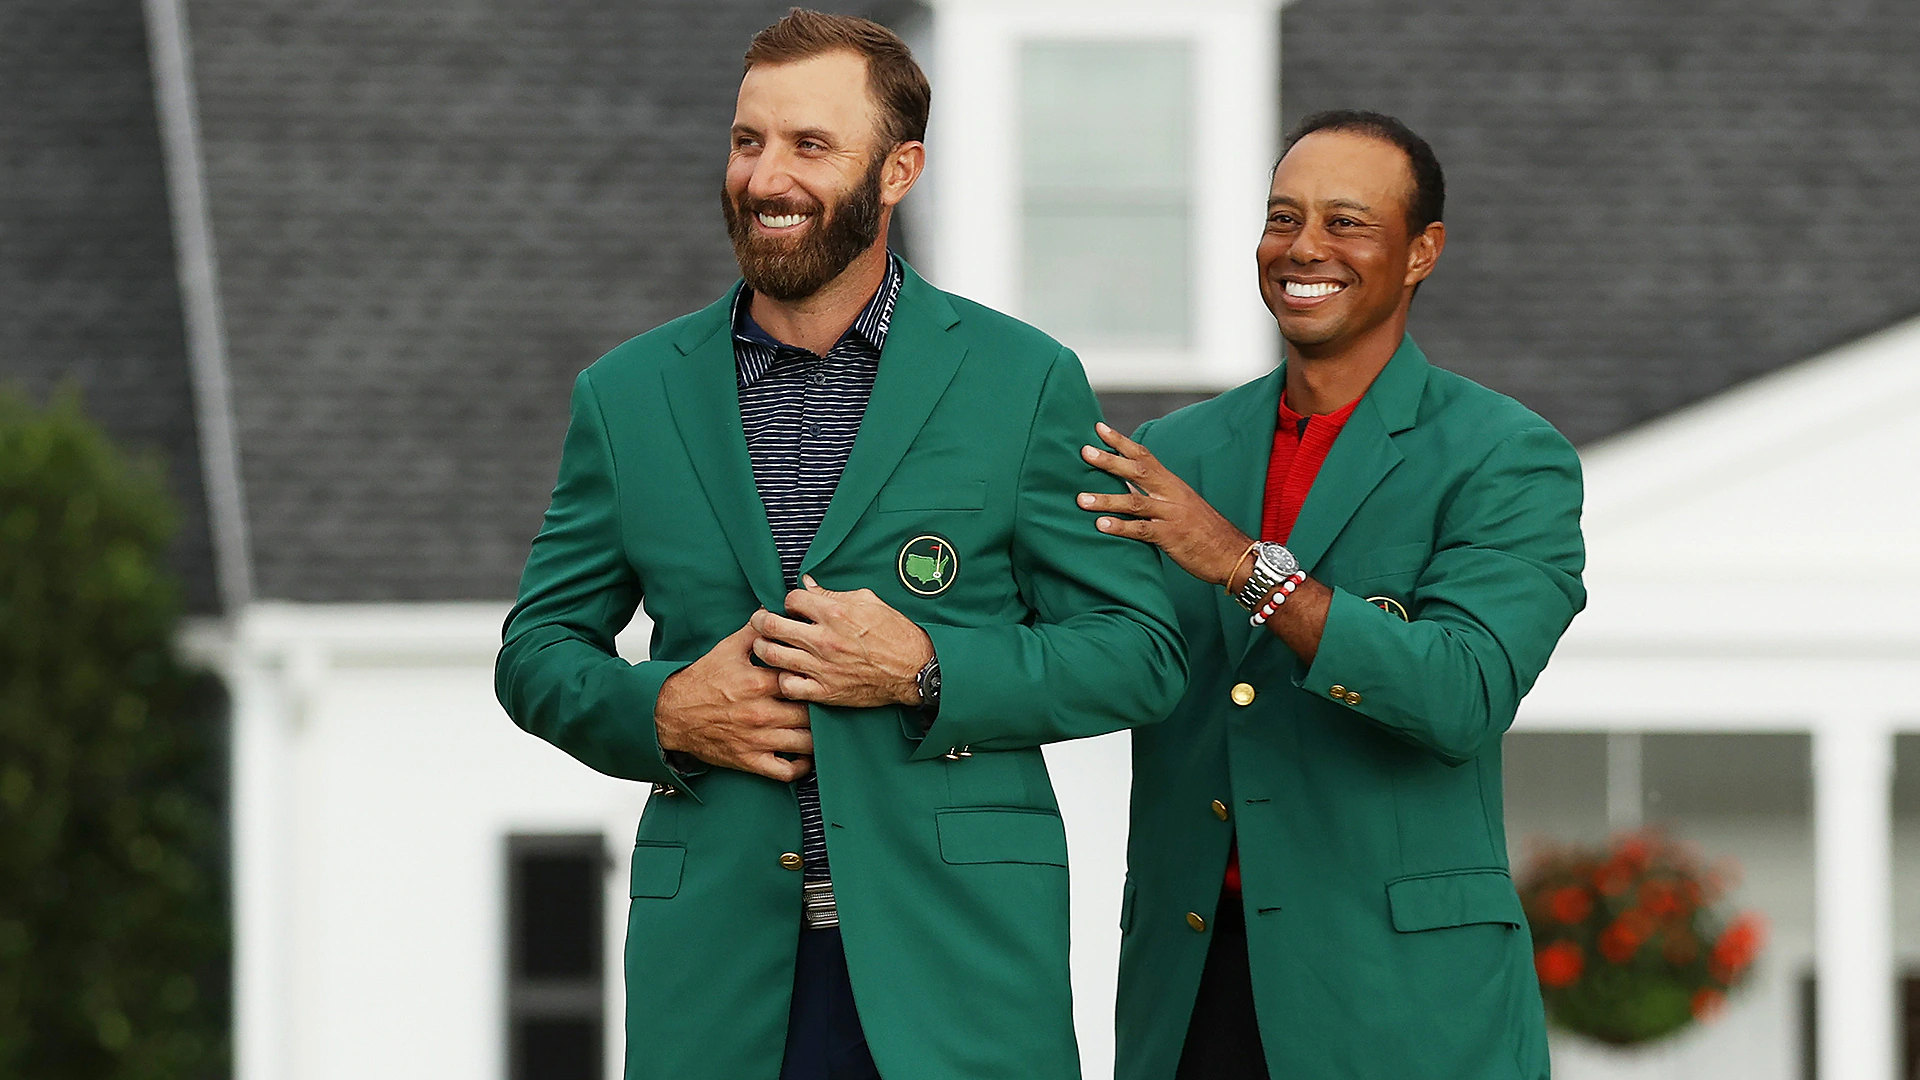 Tiger presentation cool, no patrons a bummer, but Dustin Johnson just happy to win 2020 Masters